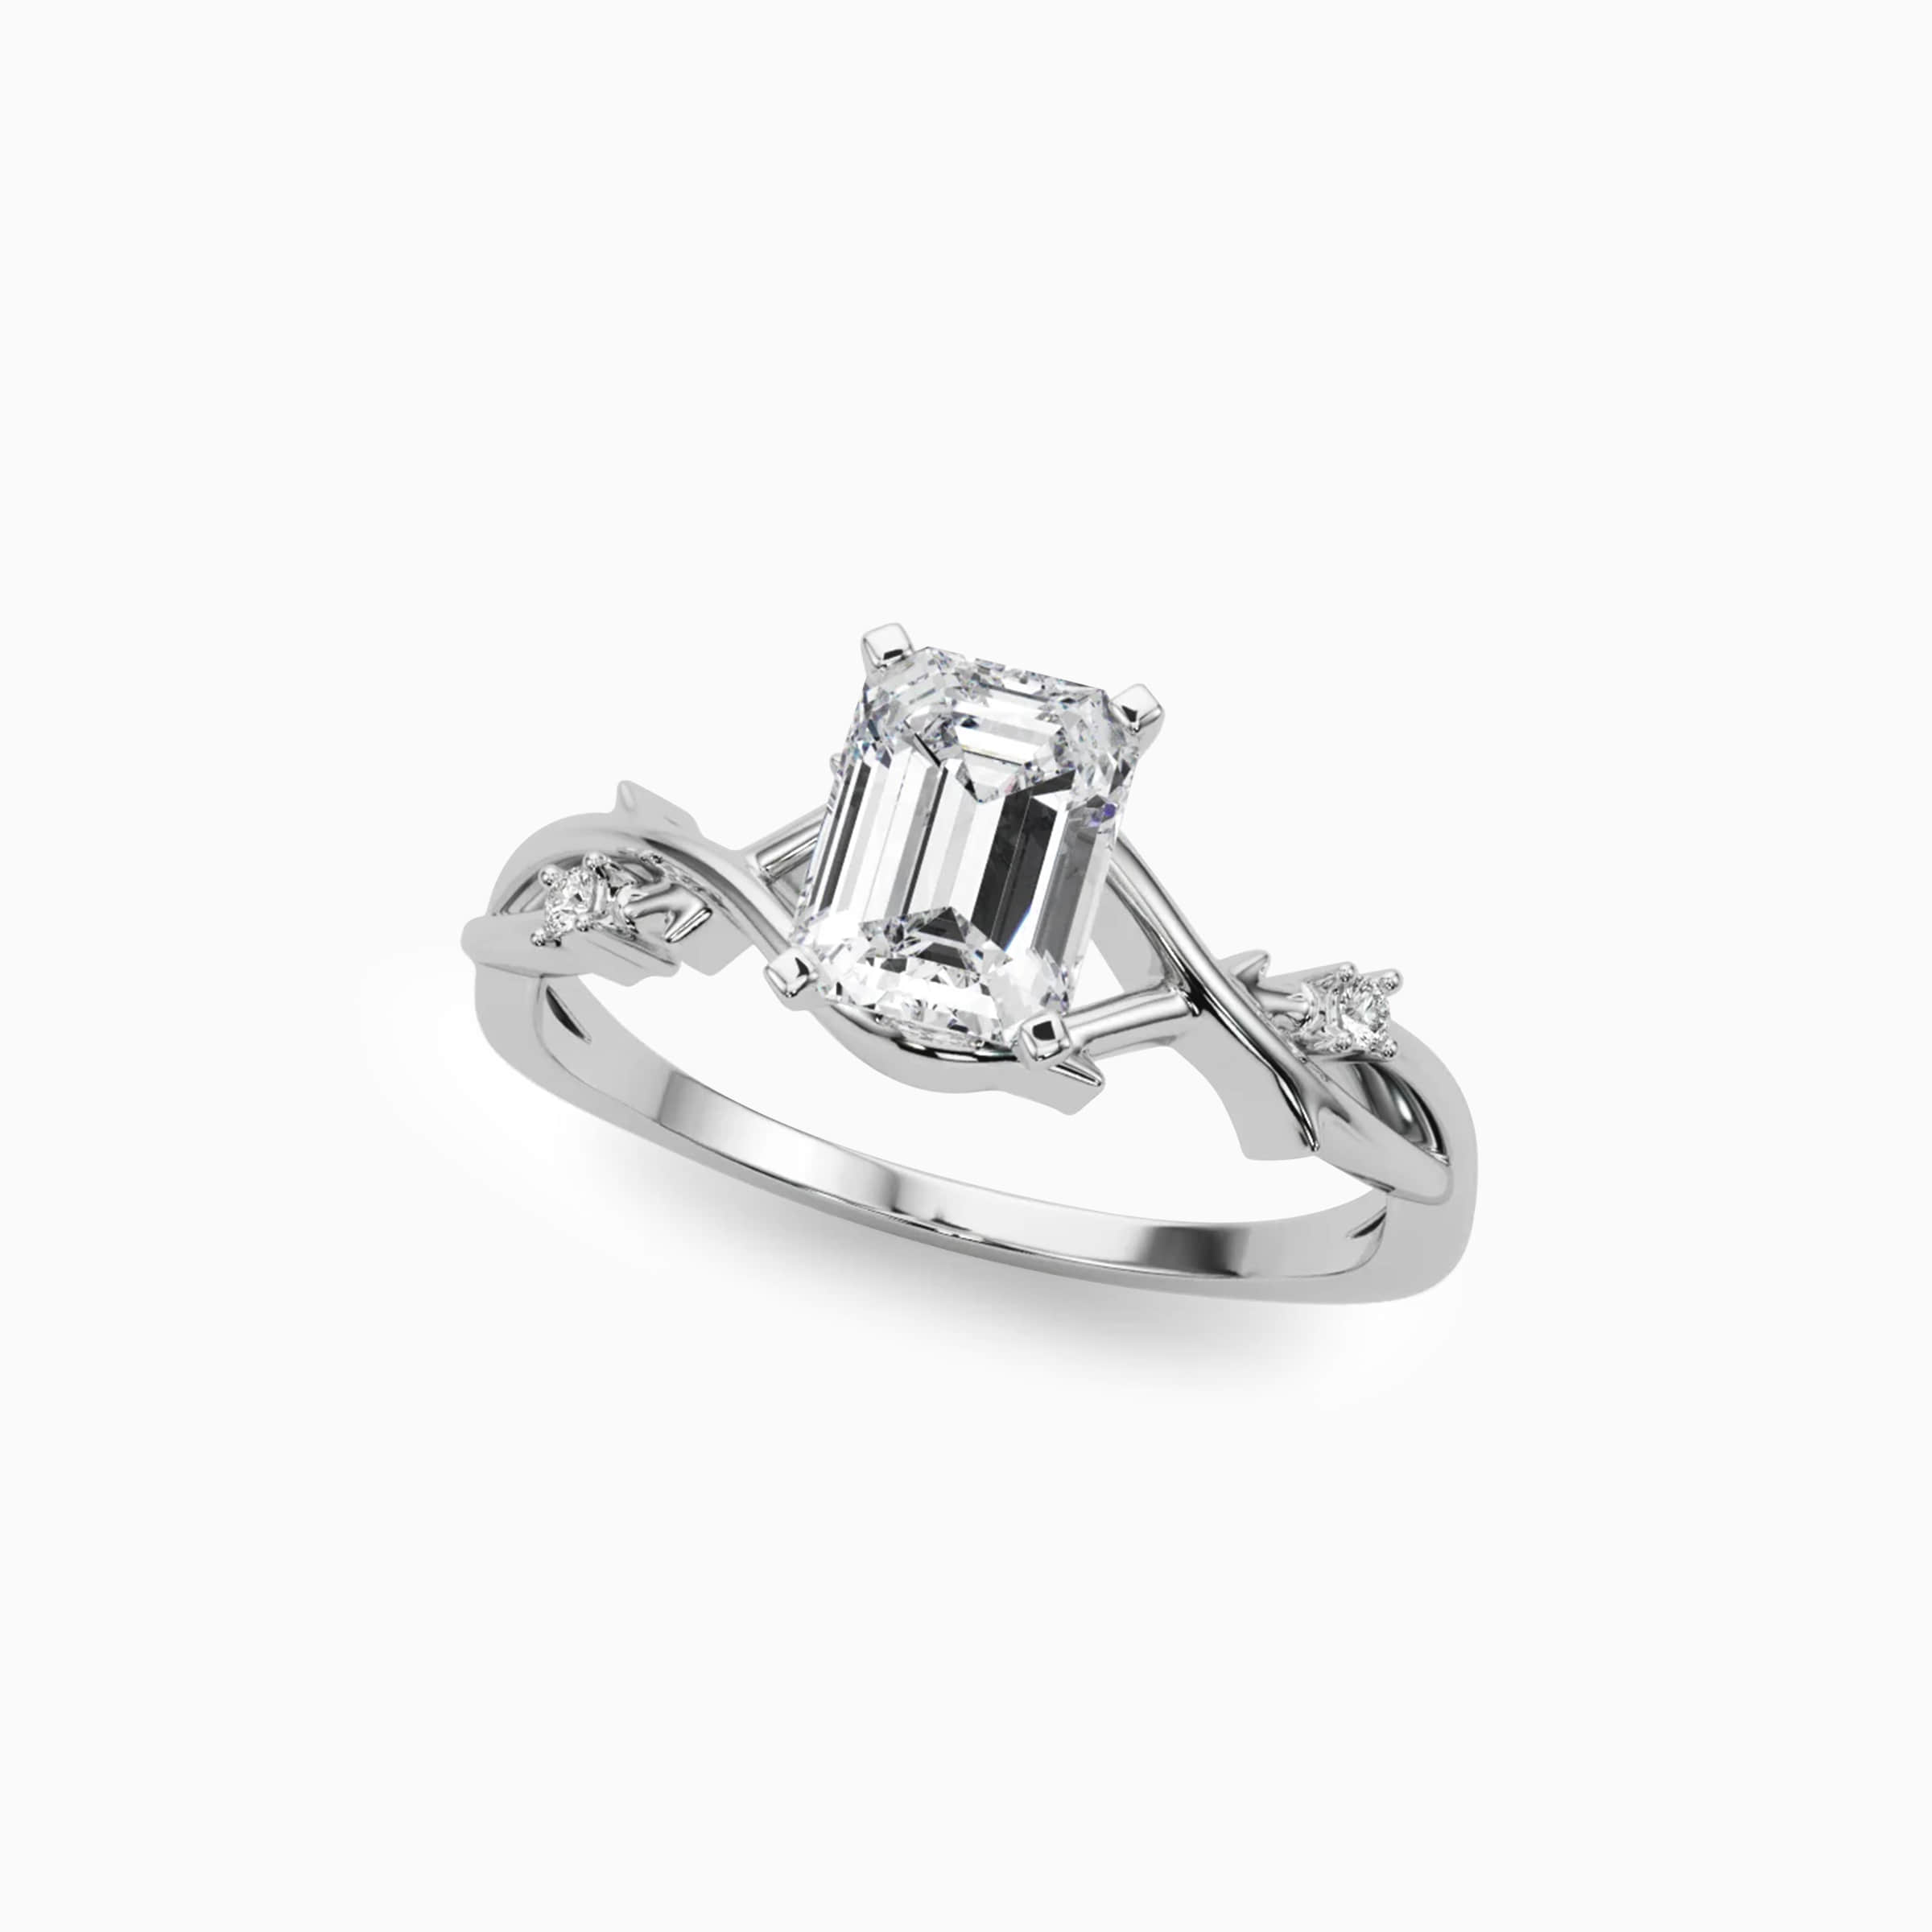 Darry Ring emerald cut engagement ring with twisted band in platinum